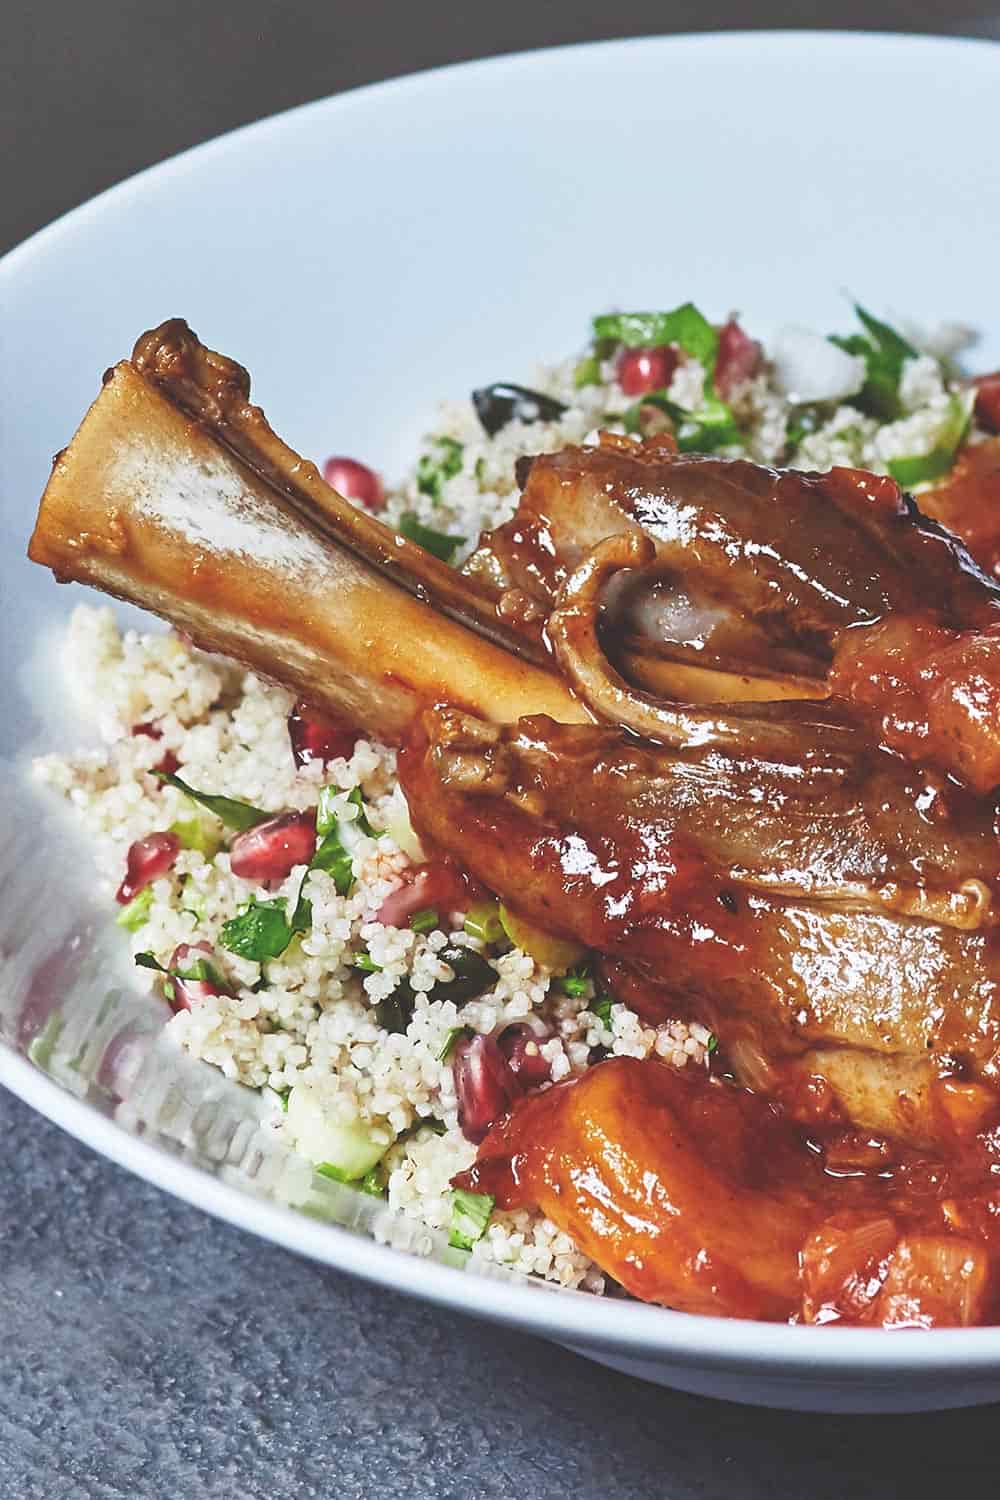 Spiced Apricot Harissa Lamb shanks with Jewelled Cous Cous